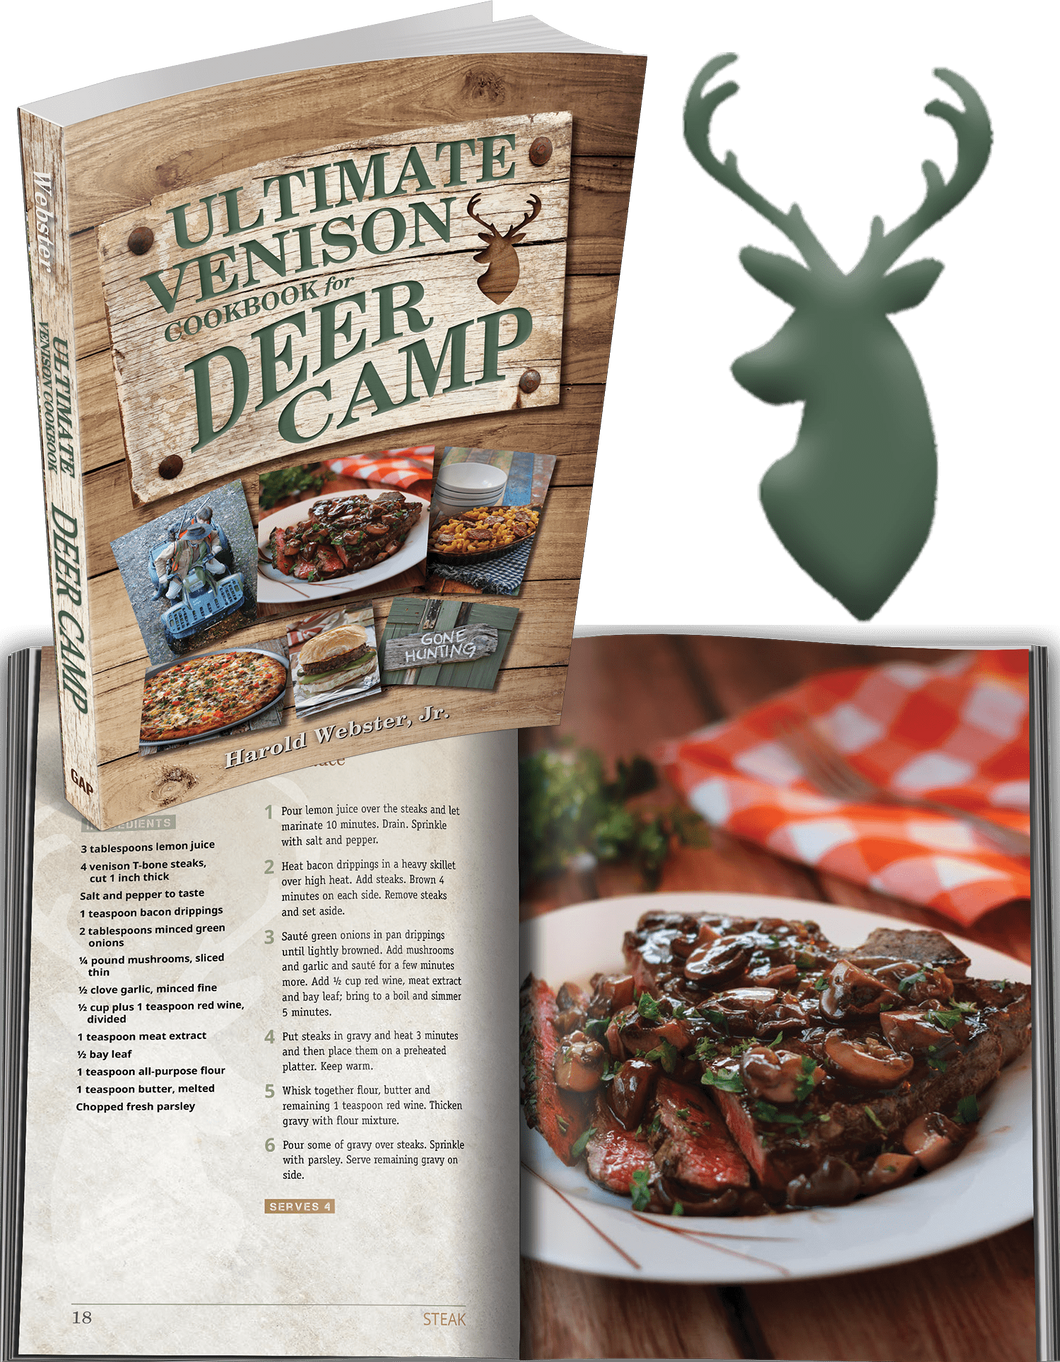 Cover and sample photo of The Ultimate Venison Cookbook for Deer Camp.